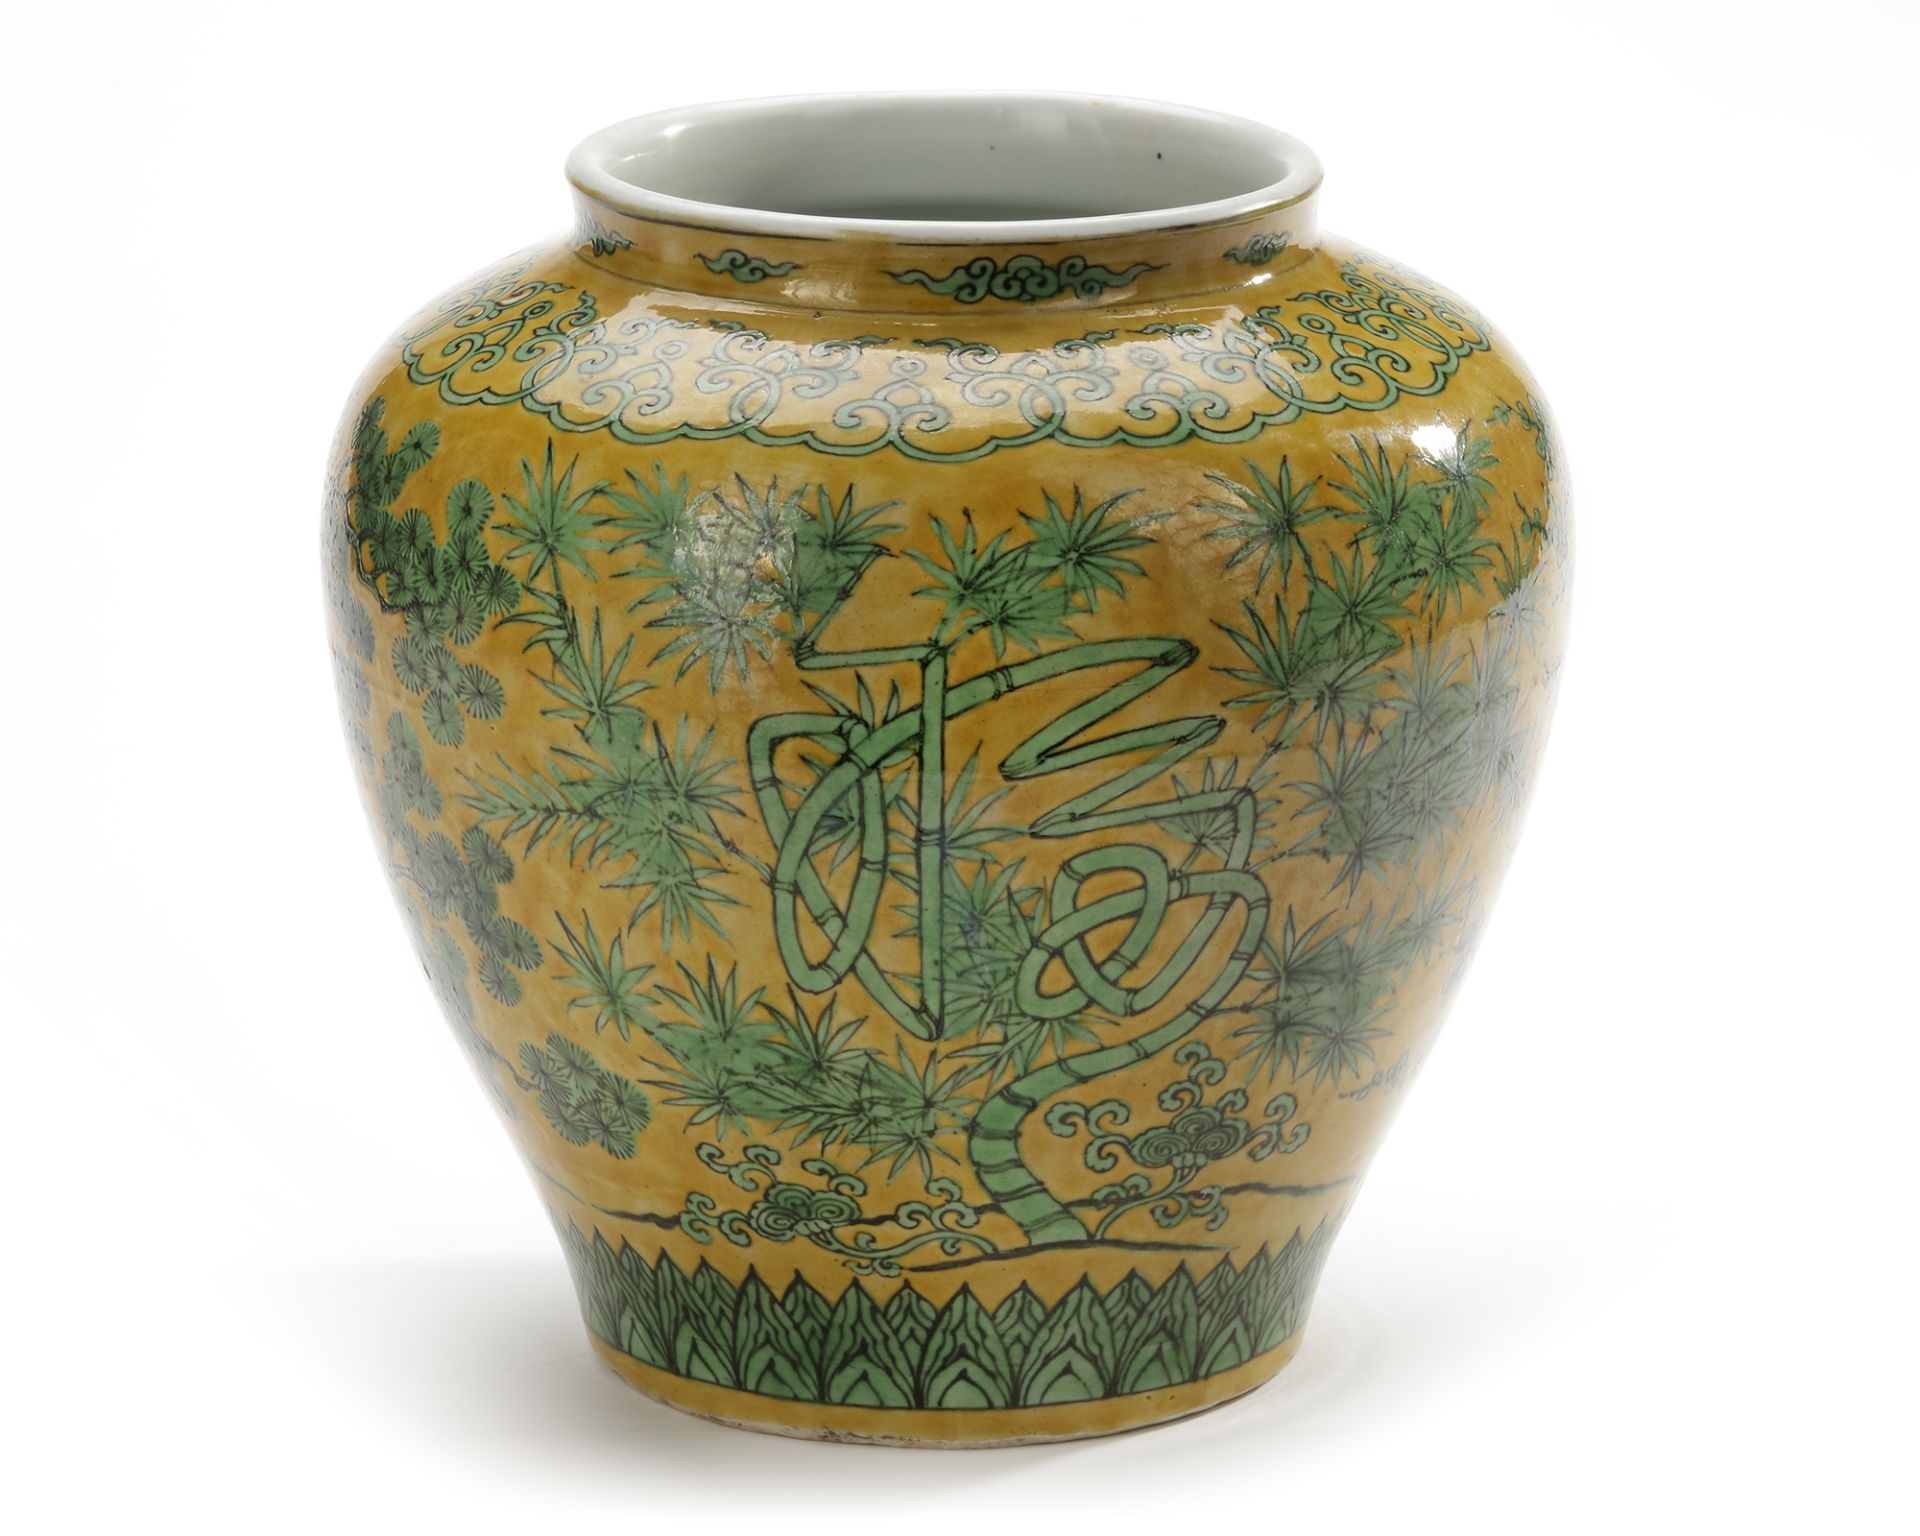 A CHINESE YELLOW-GROUND GREEN ENAMELED JAR, MING DYNASTY (1368-1644) OR LATER - Image 2 of 5